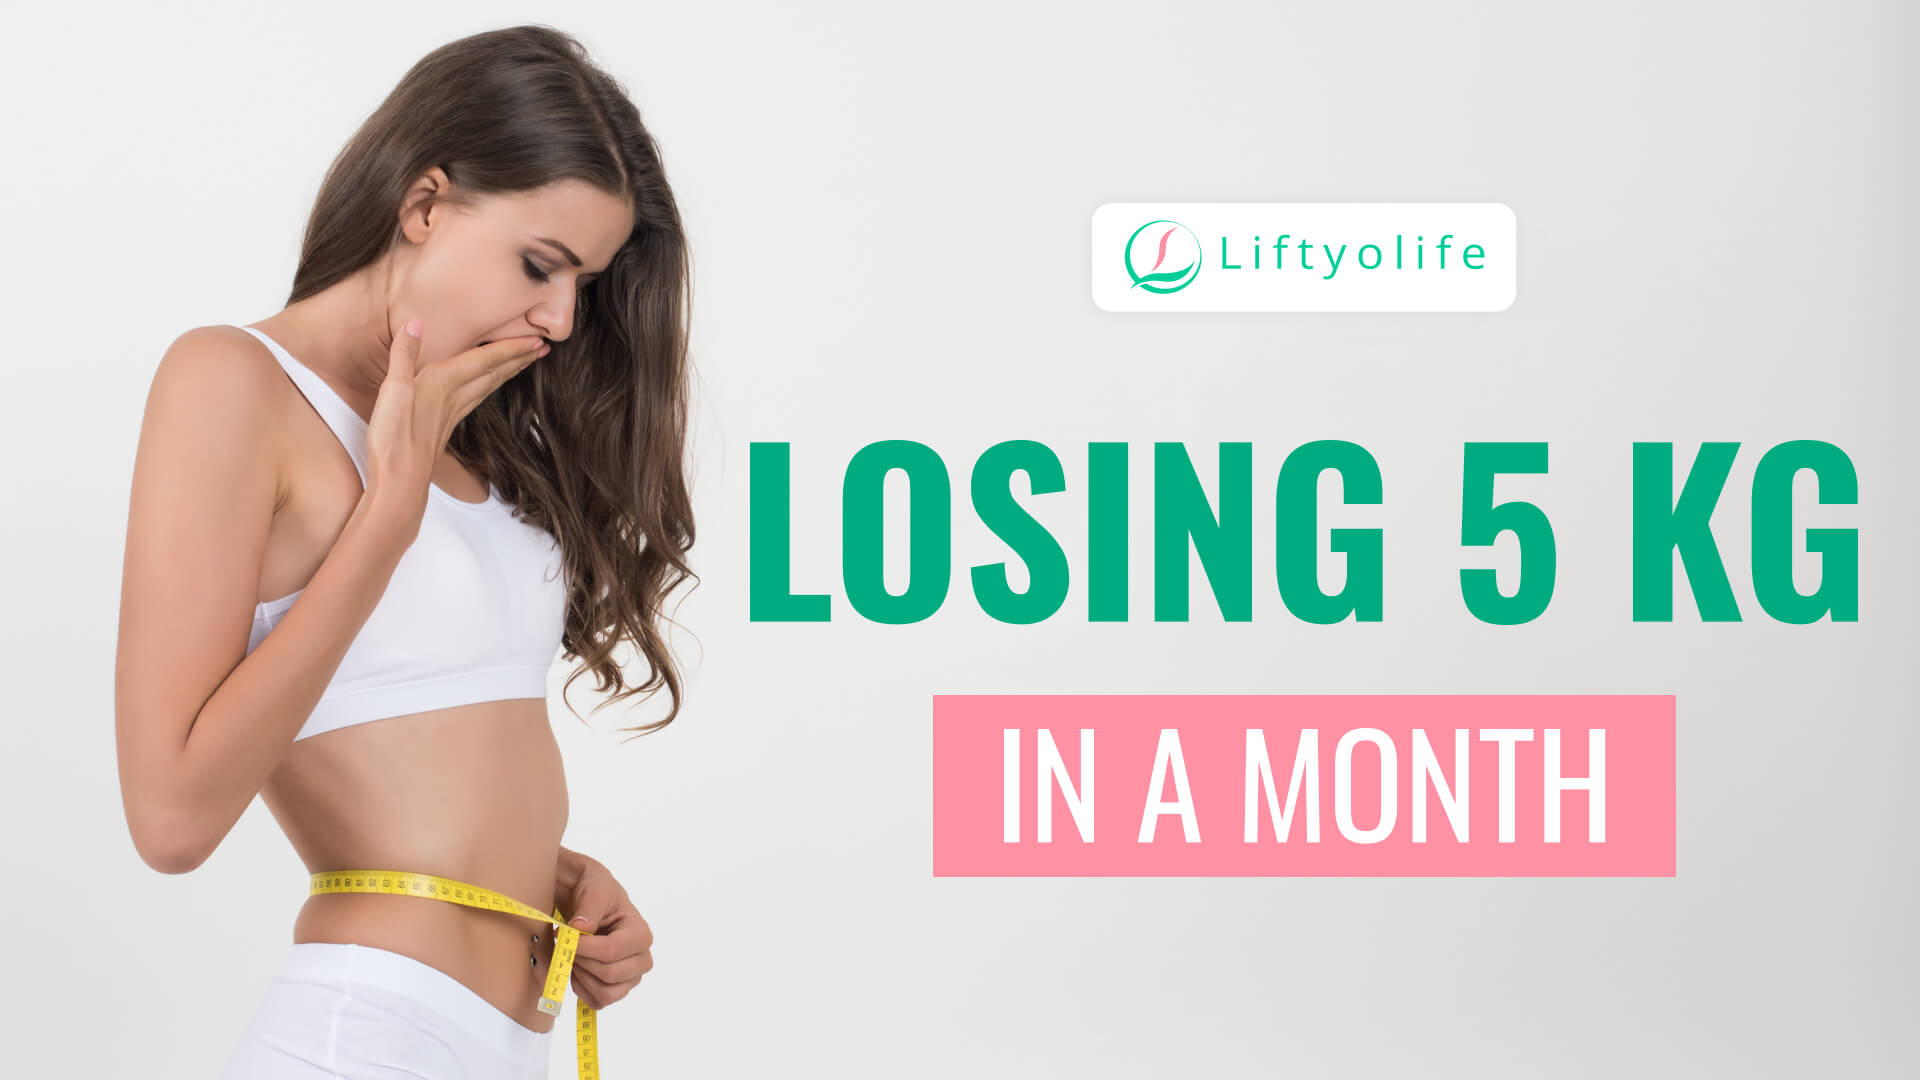 How To Lose 5 Kg In A Month? Weight Loss Tips